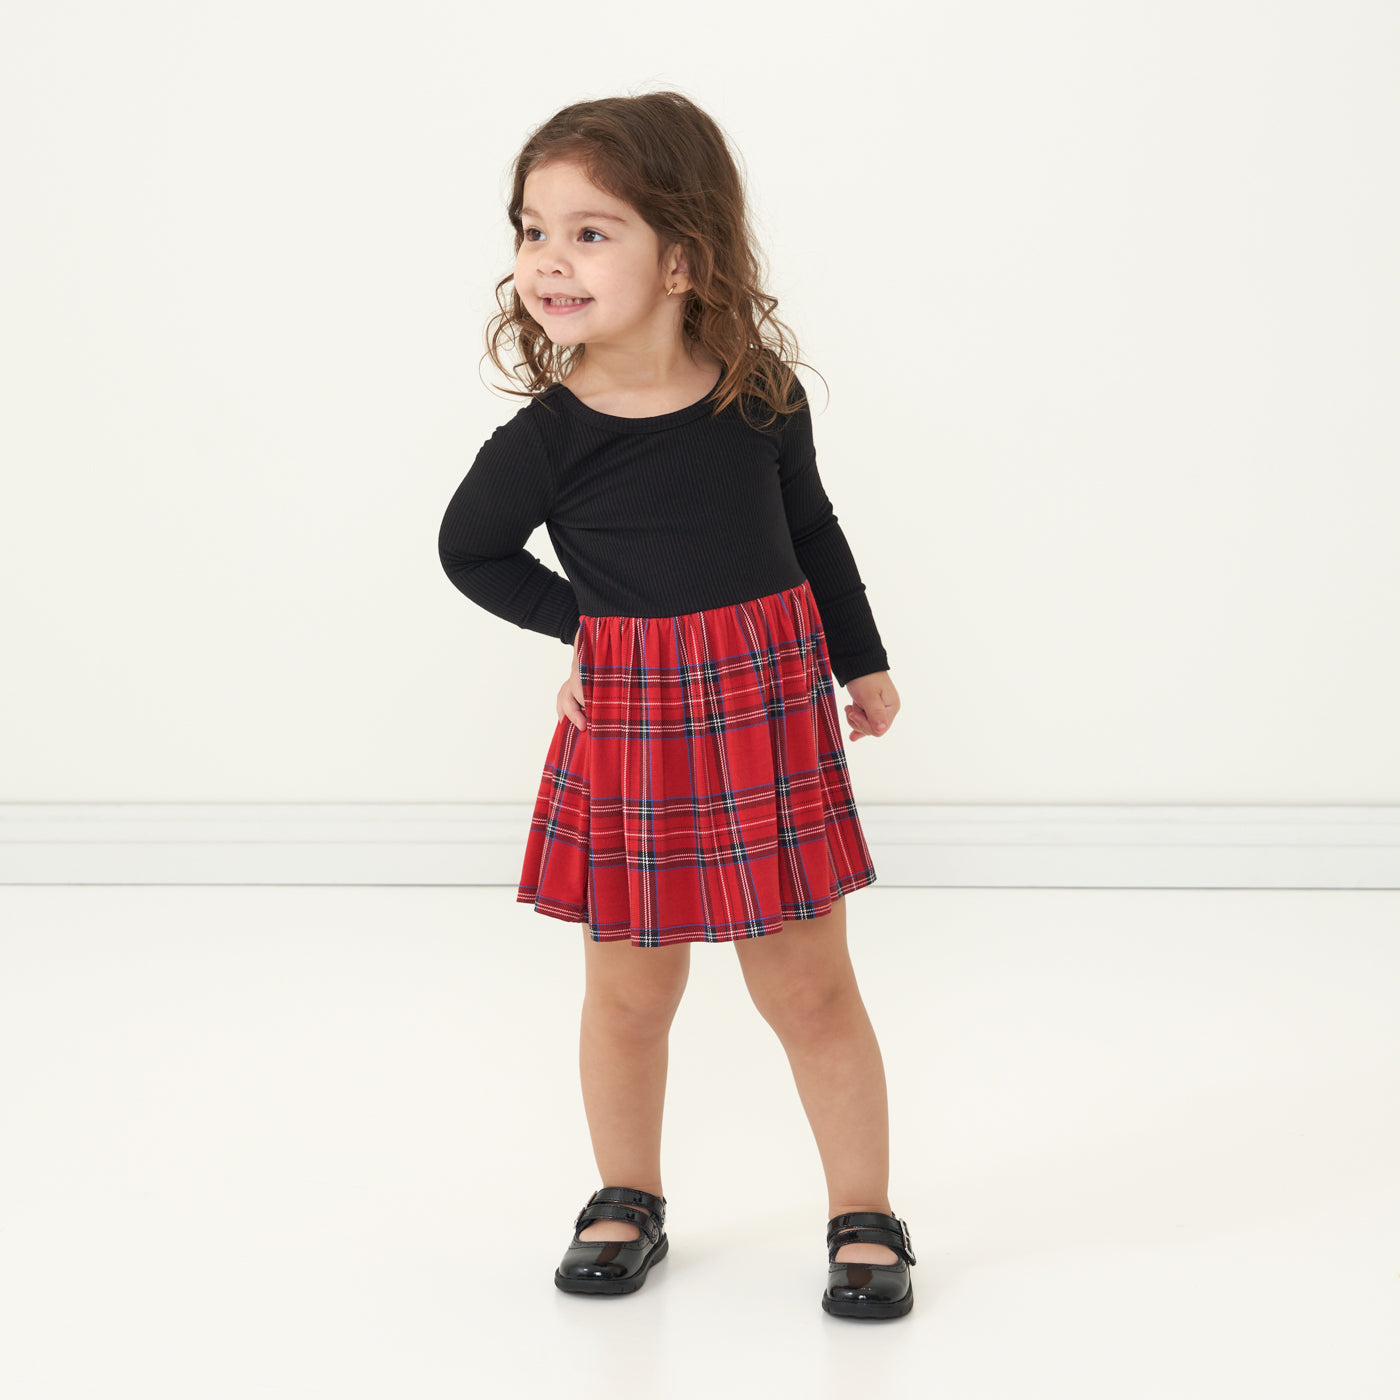 Child looking to the side wearing a Holiday Plaid skater dress with bodysuit